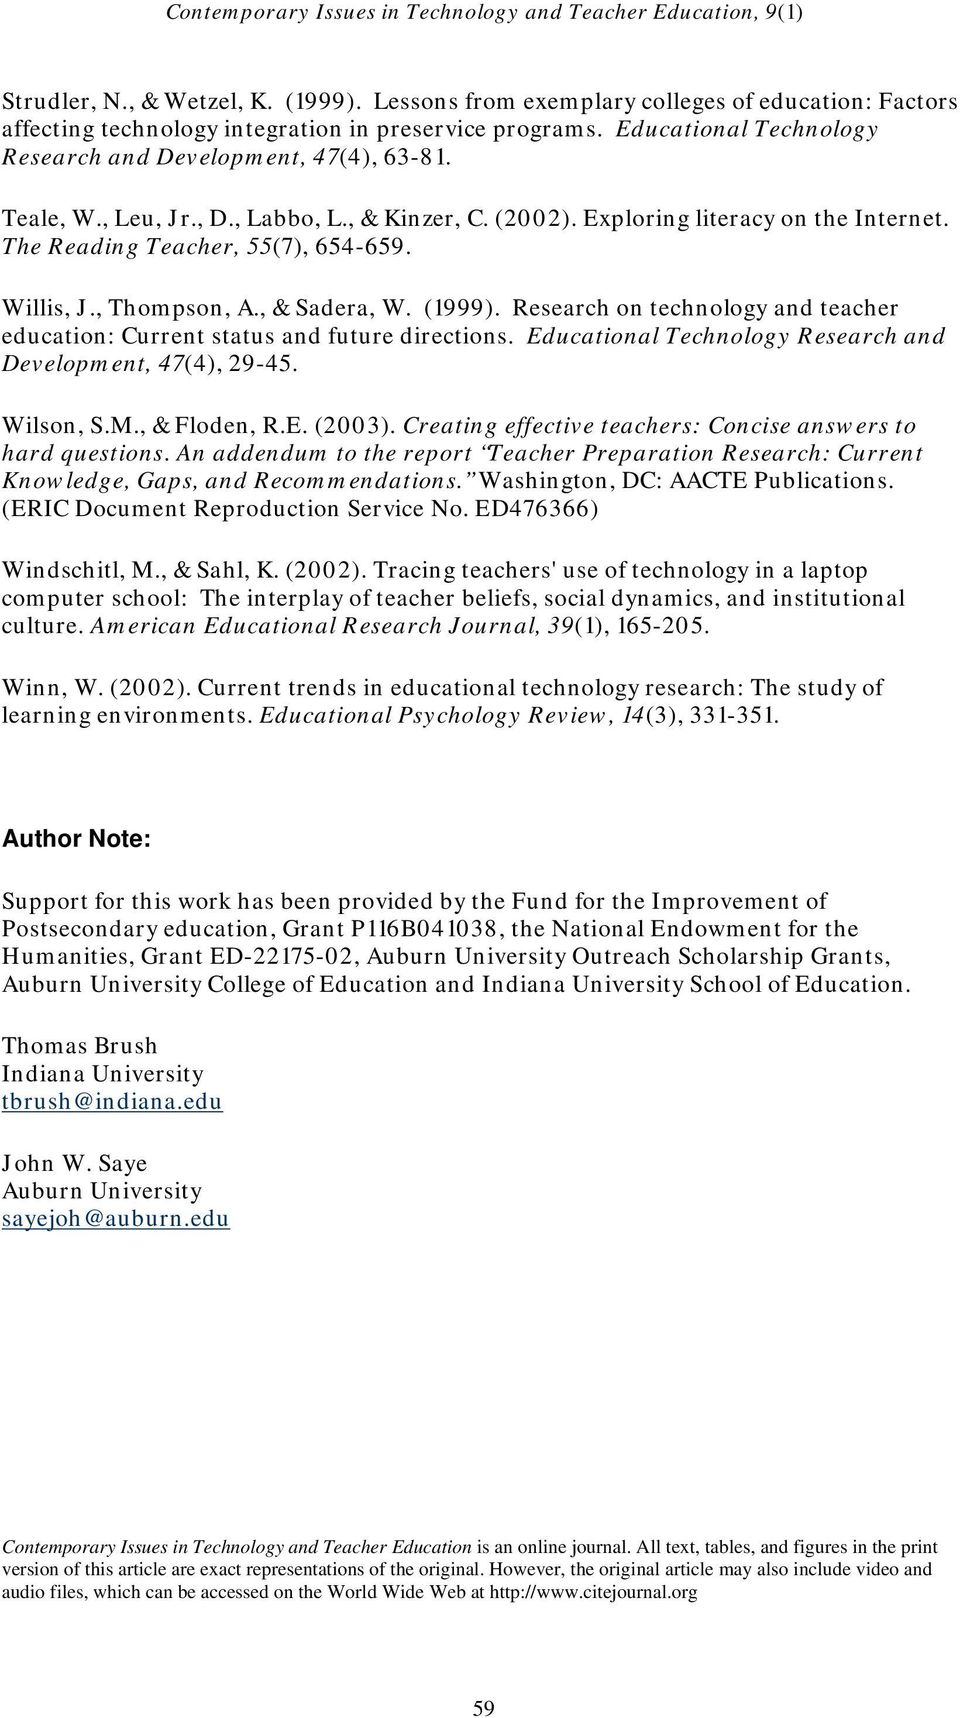 Willis, J., Thompson, A., & Sadera, W. (1999). Research on technology and teacher education: Current status and future directions. Educational Technology Research and Development, 47(4), 29-45.